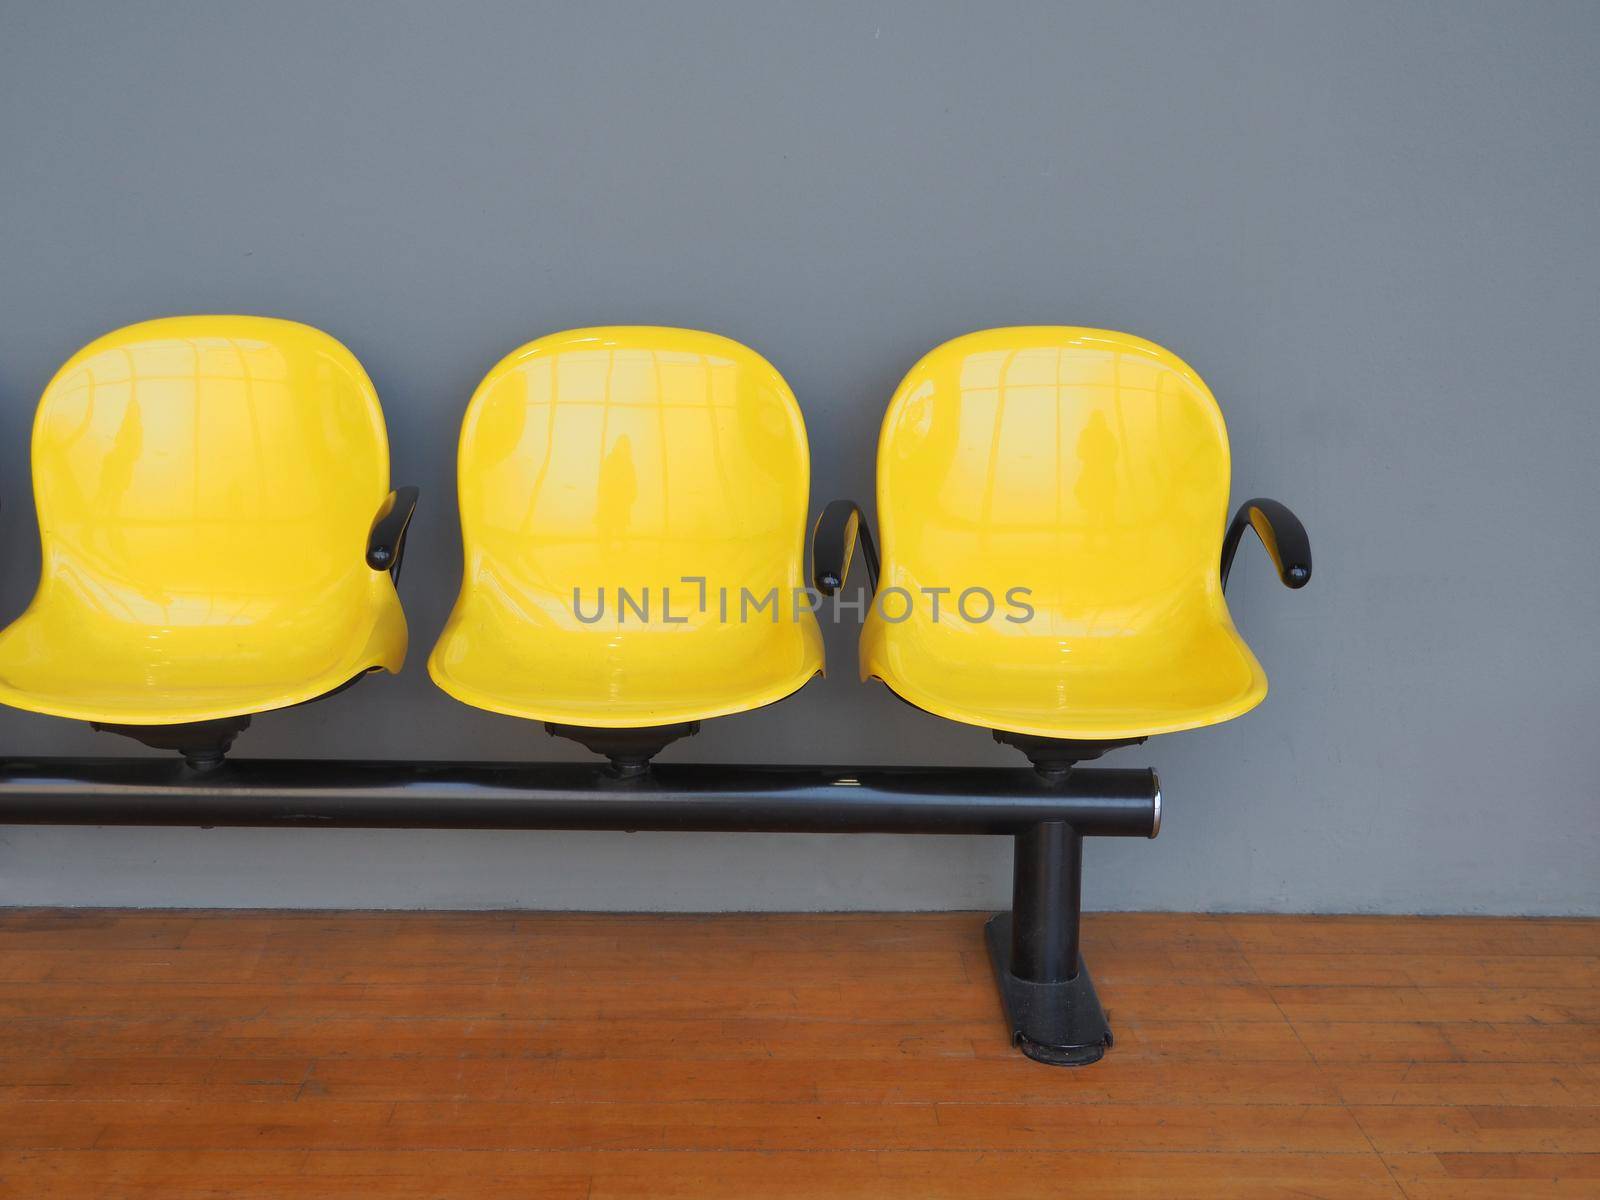 Empty yellow seats in a waiting room